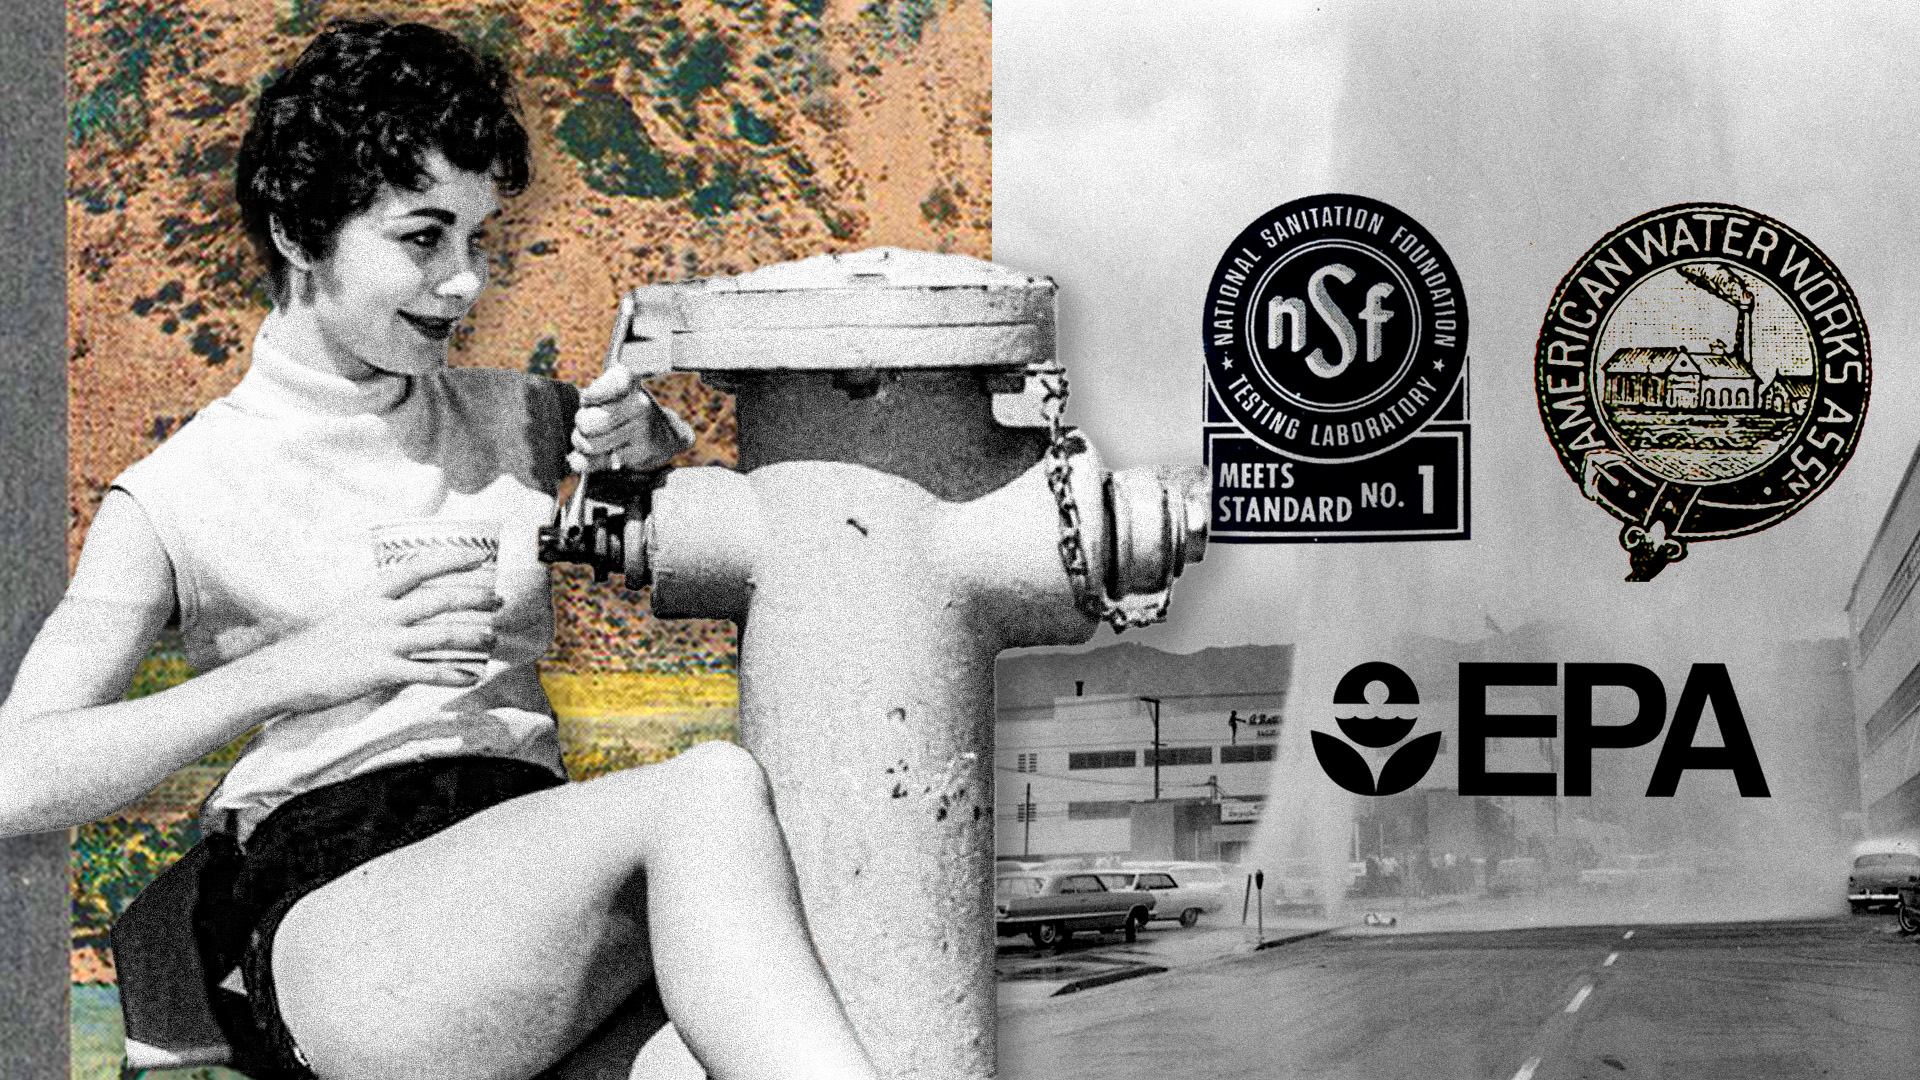 Logos of water industry regulation agencies with vintage photo of woman opening hydrant with a wrench